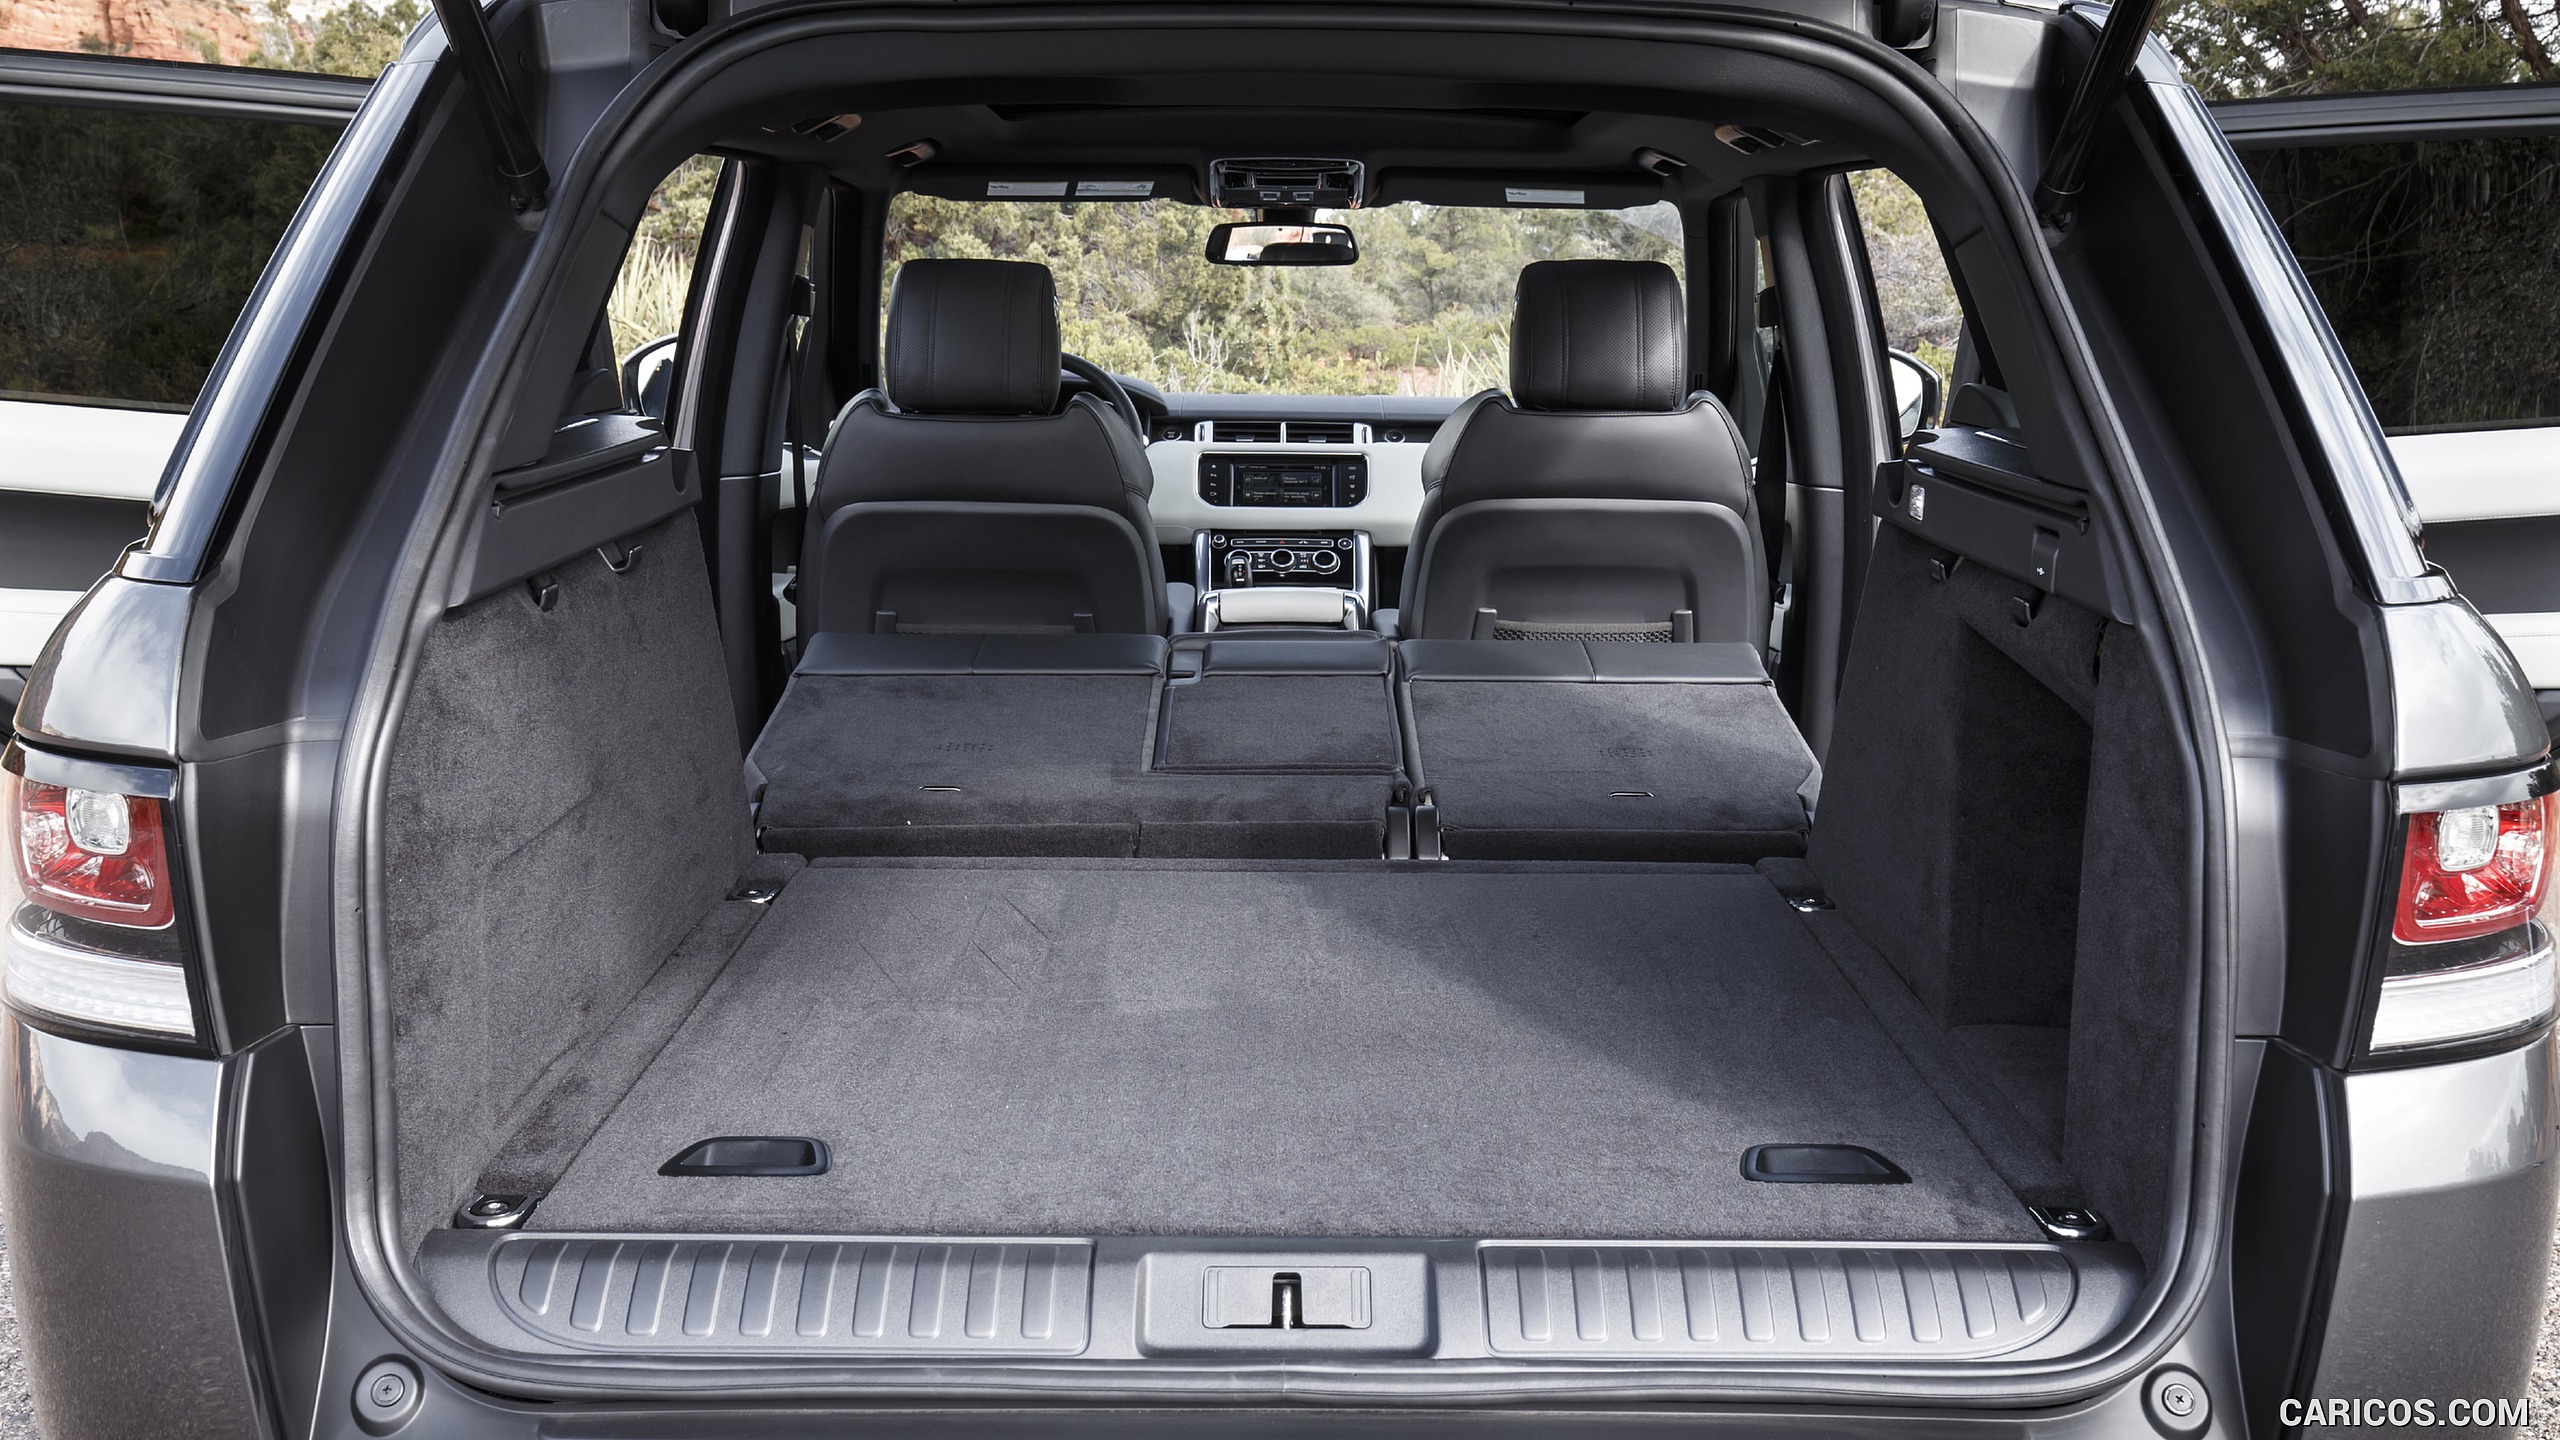 2018 dodge journey cargo space dimensions